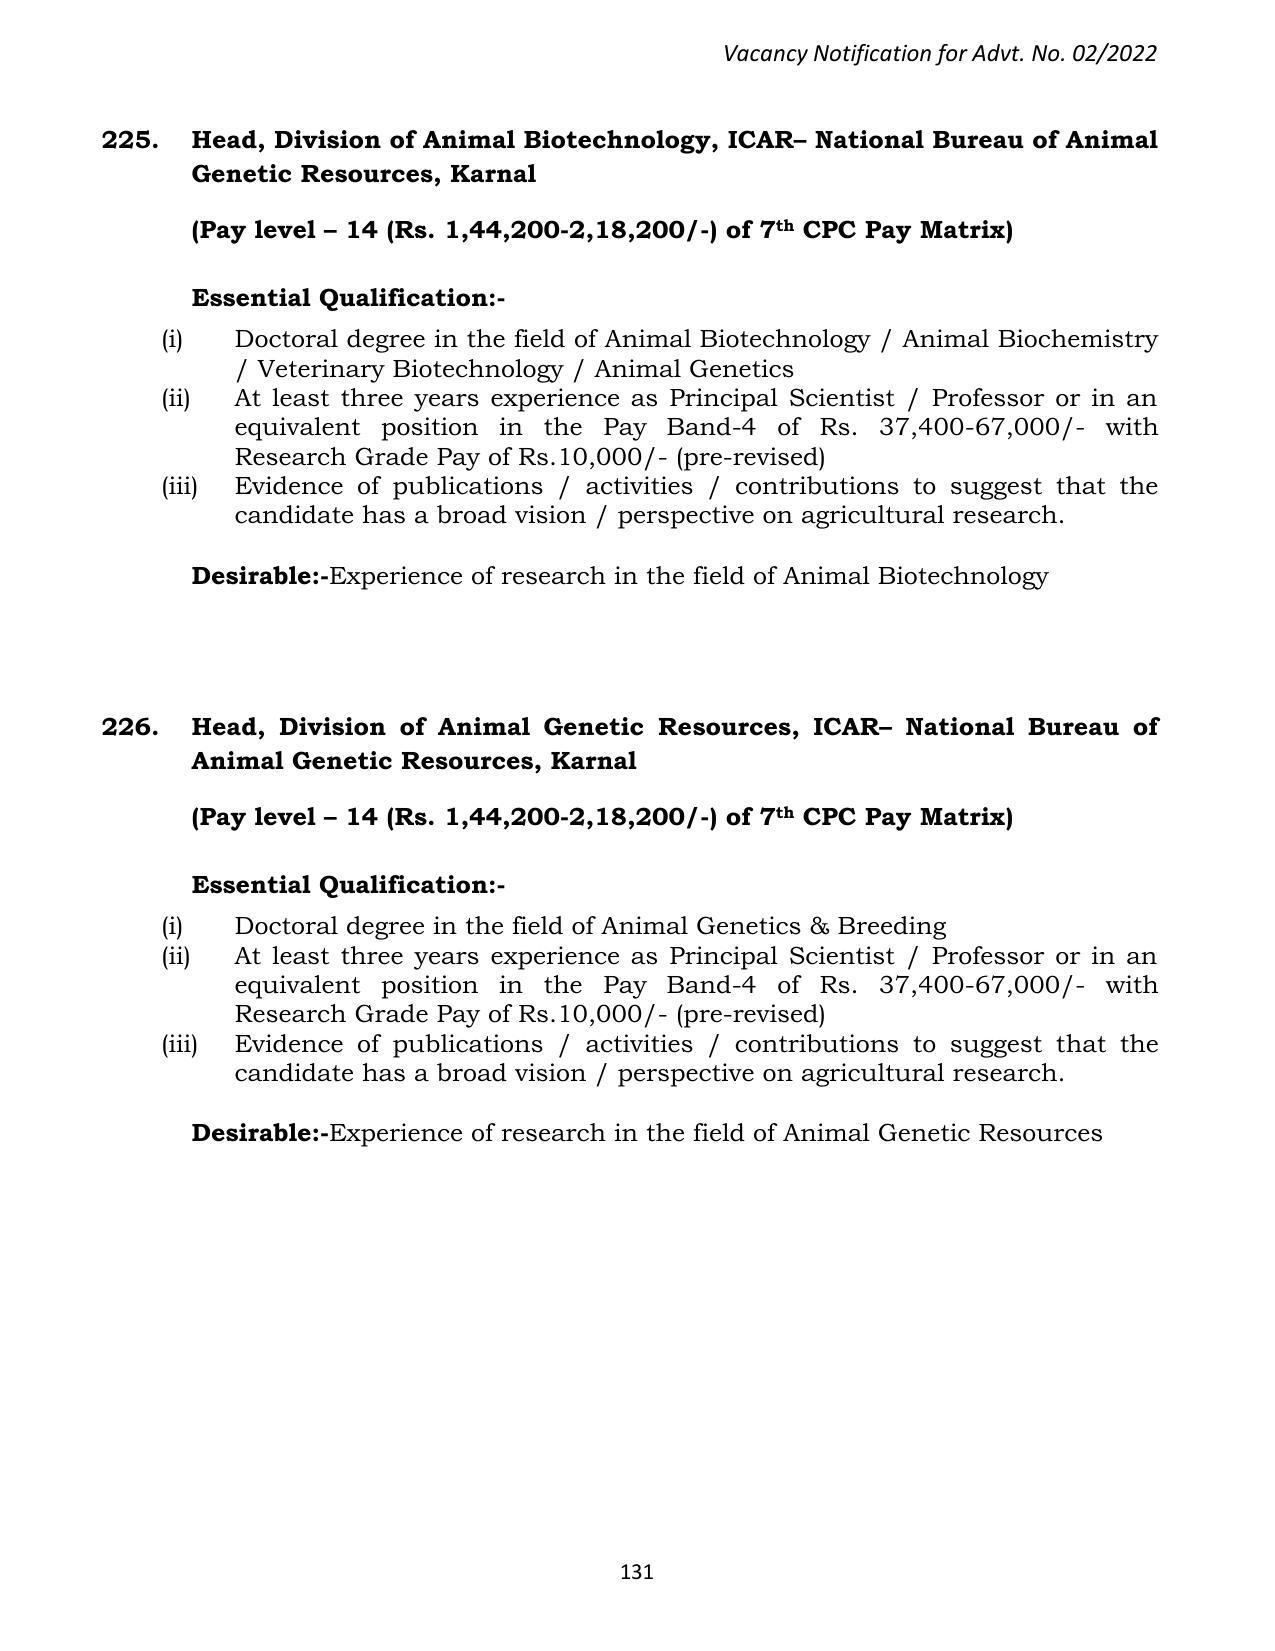 ASRB Non-Research Management Recruitment 2022 - Page 54